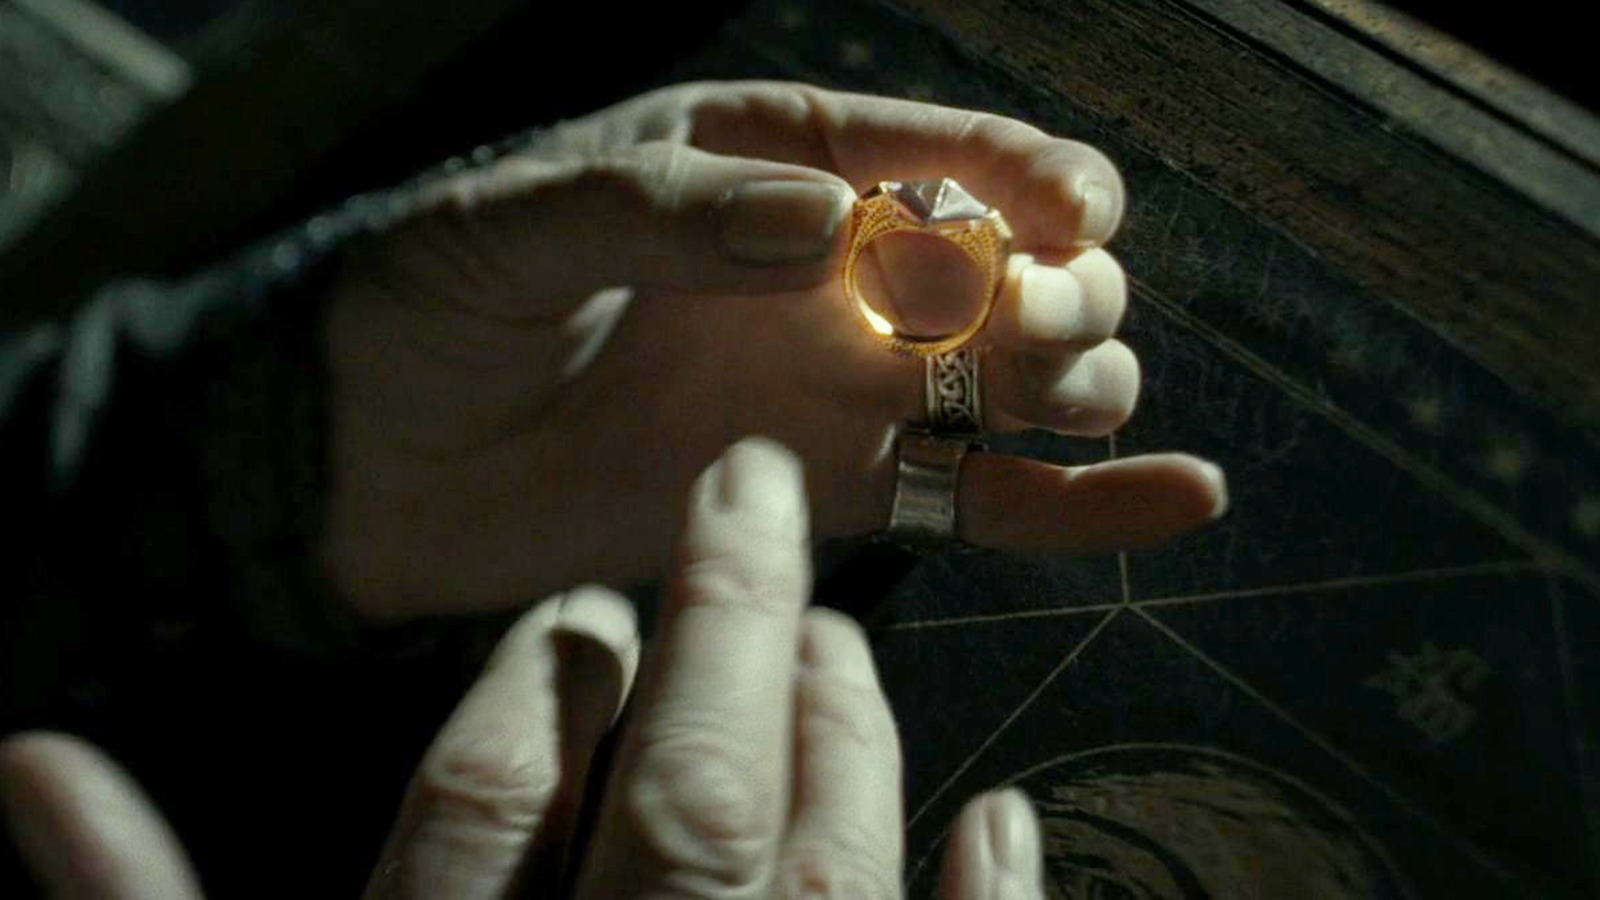 kål Resignation Officer How Did Dumbledore Destroy Marvolo Gaunt's Ring in 'Half-Blood Prince?'